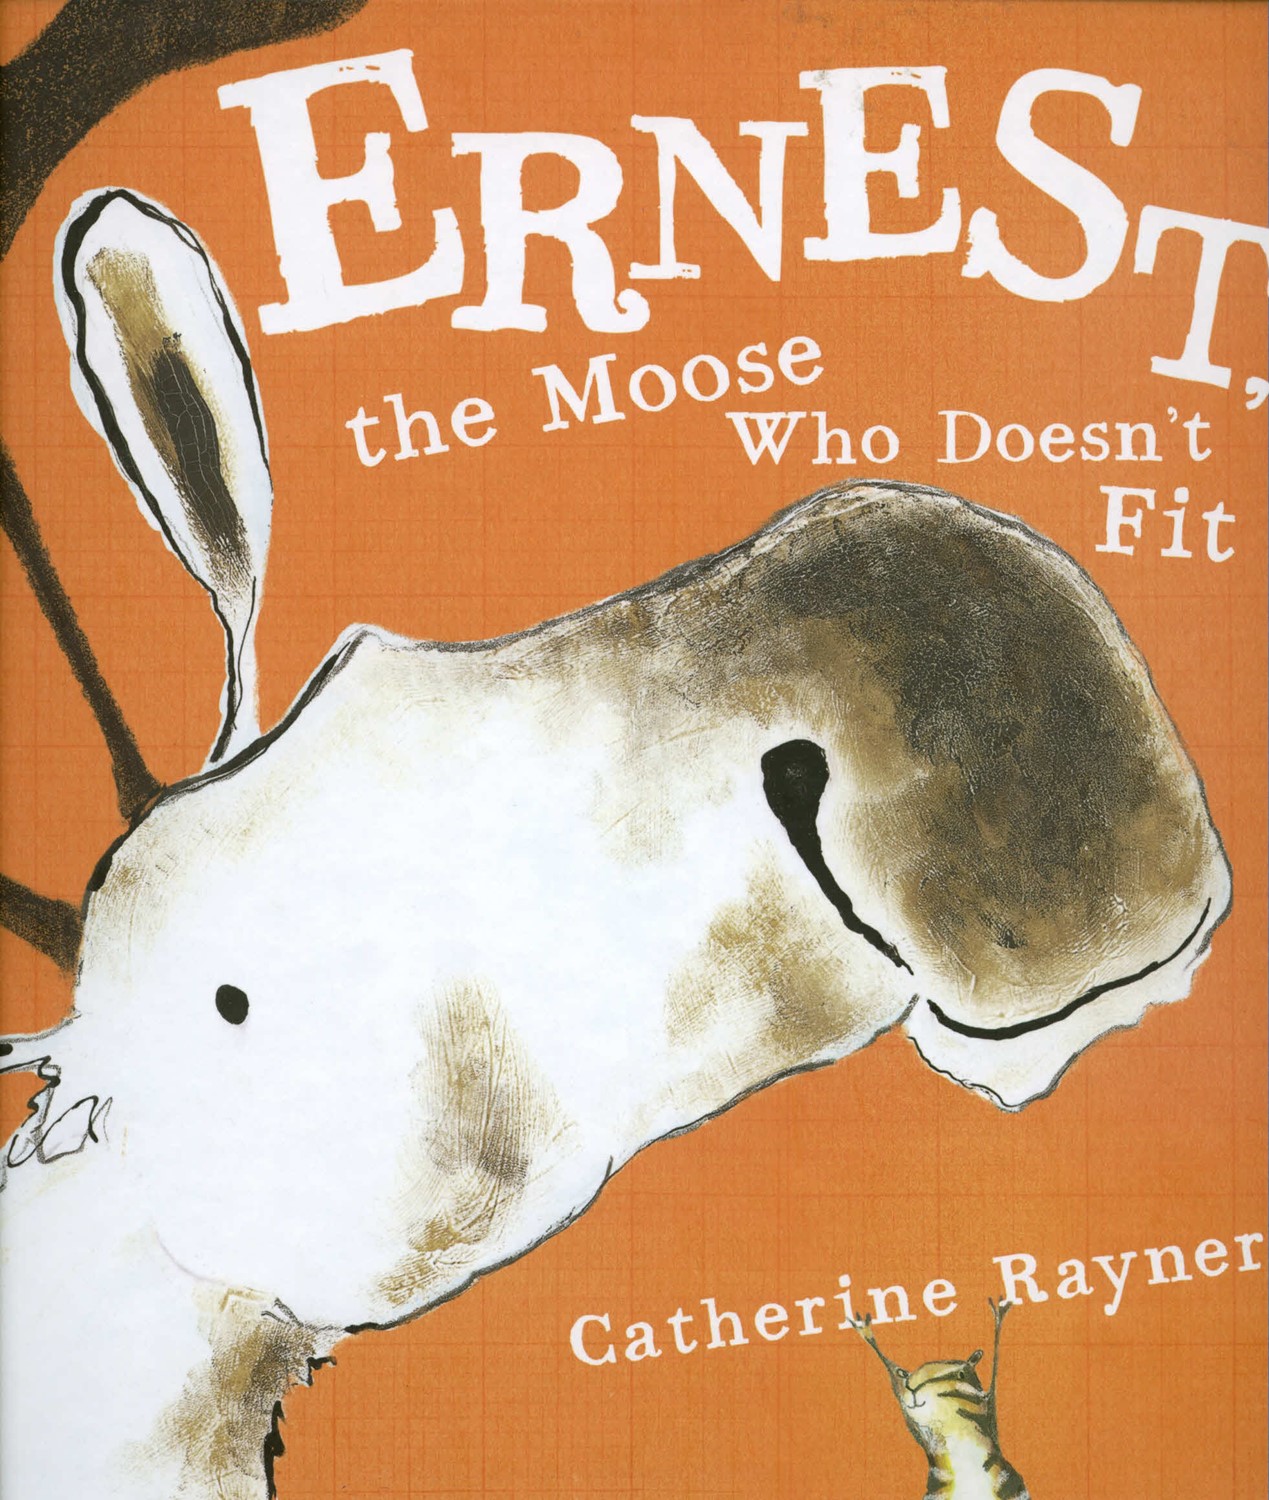 Ernest, the Moose Who Doesn't Fit (HC) Ernest, the Moose Who Doesn't Fit (HC)